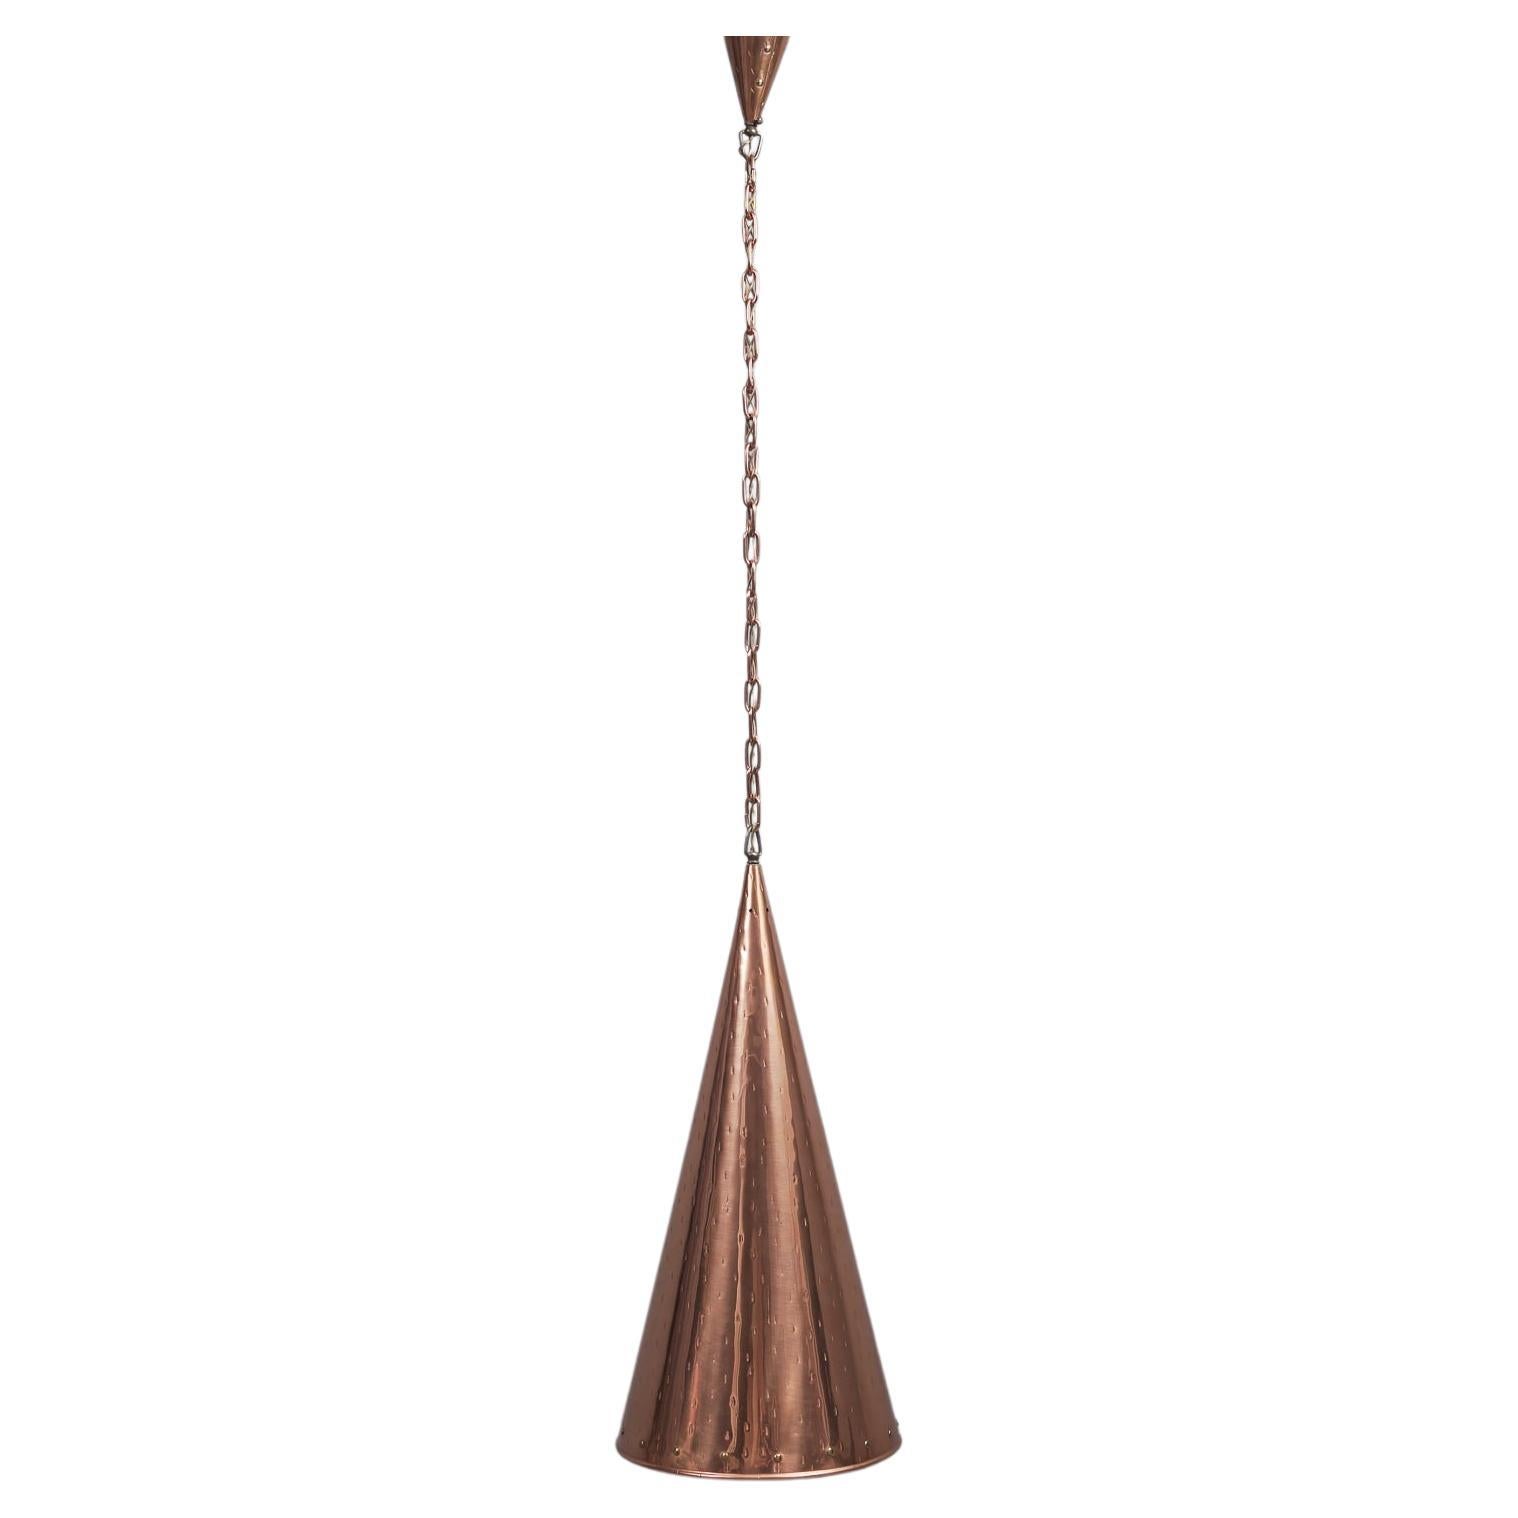 Hammered Copper Cone Pendant Lamps by E.S Horn Aalestrup, 1950s Denmark For Sale